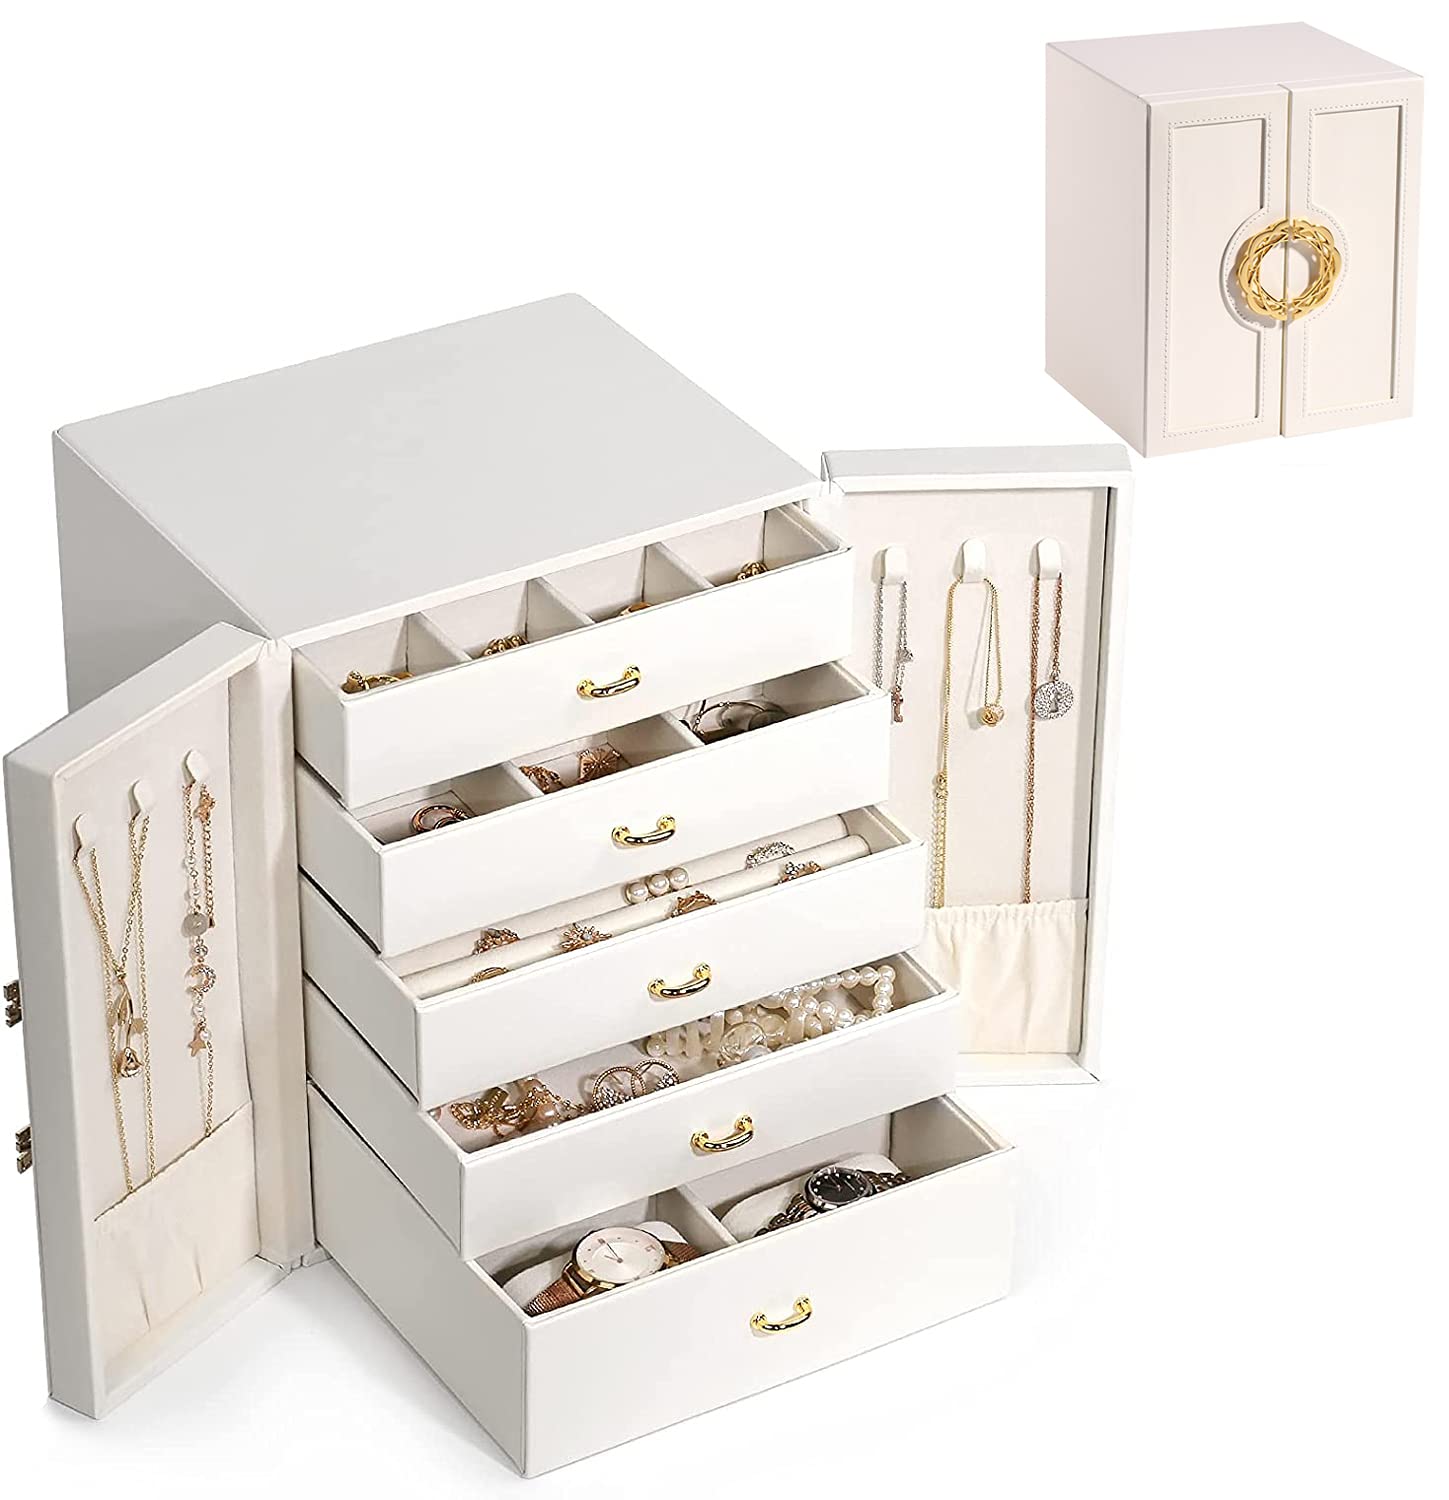 Large Jewellery Box Jewelry Organiser,5-Layer Jewelry Display Storage Case for Earring Necklace Bracelets Rings Watches Jewelry Holder (White)